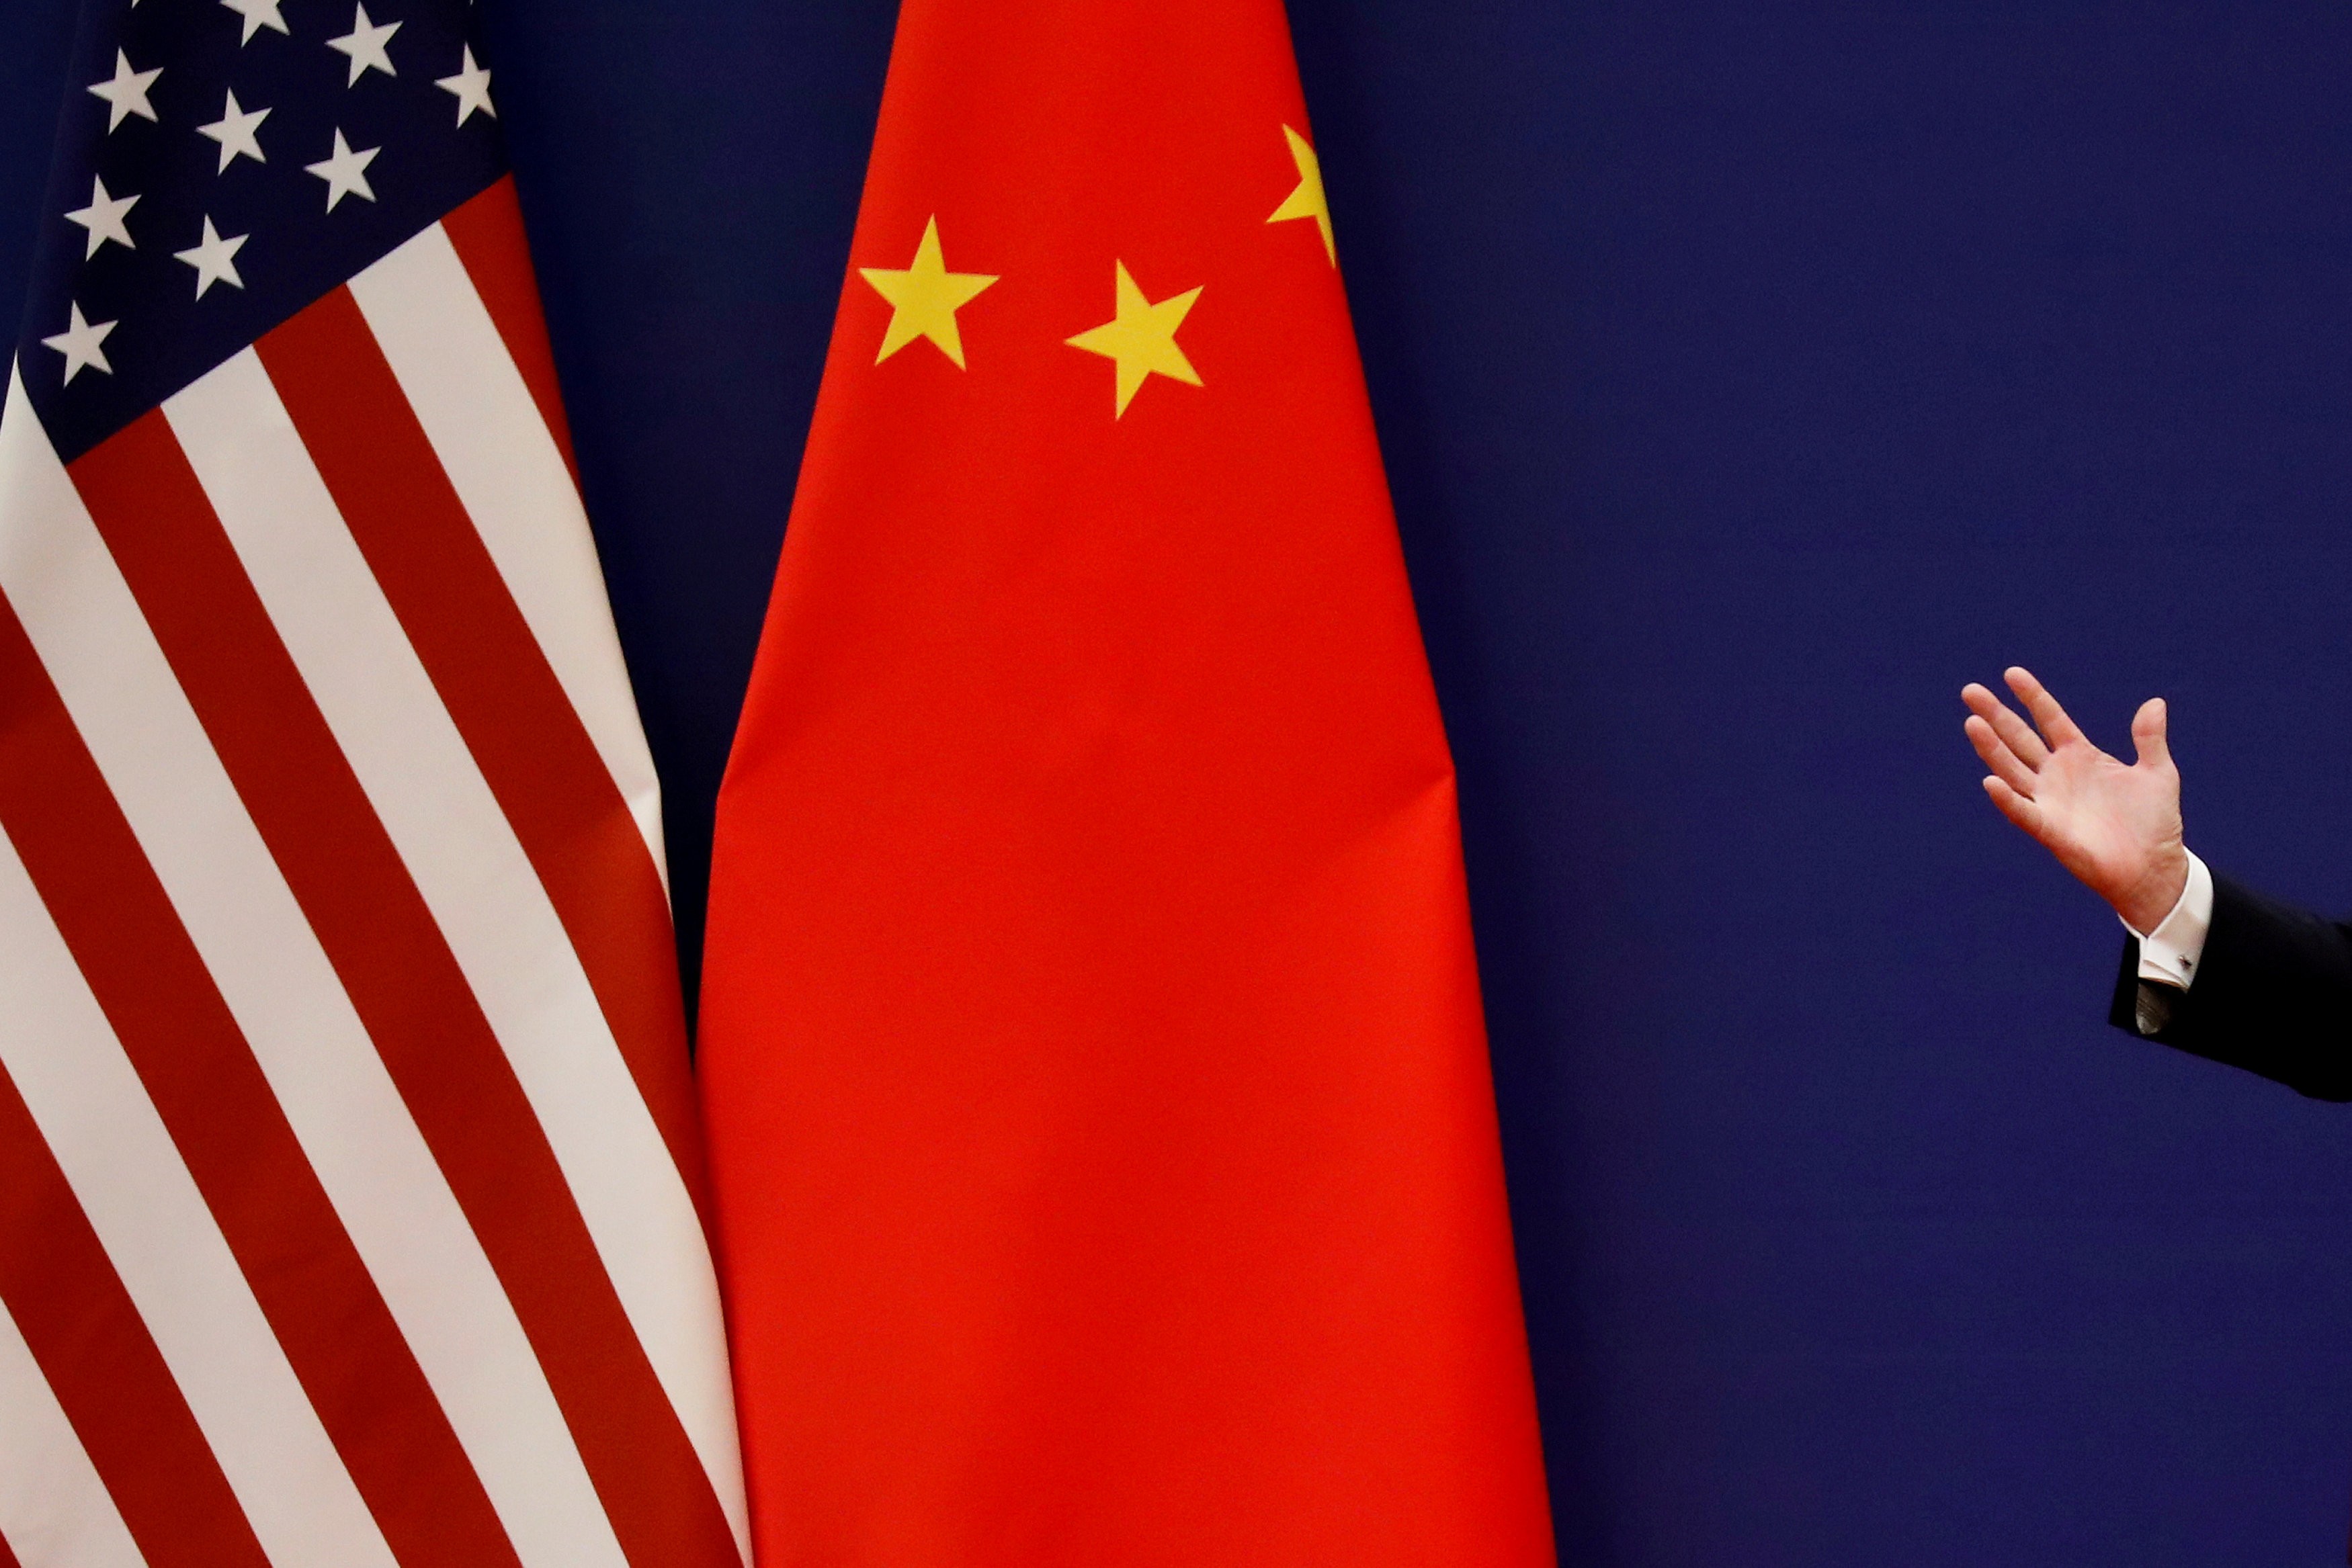 Both sides will find it hard to step back in the confrontation over trade and the result will be a world divided in a deja vu of the old cold war days